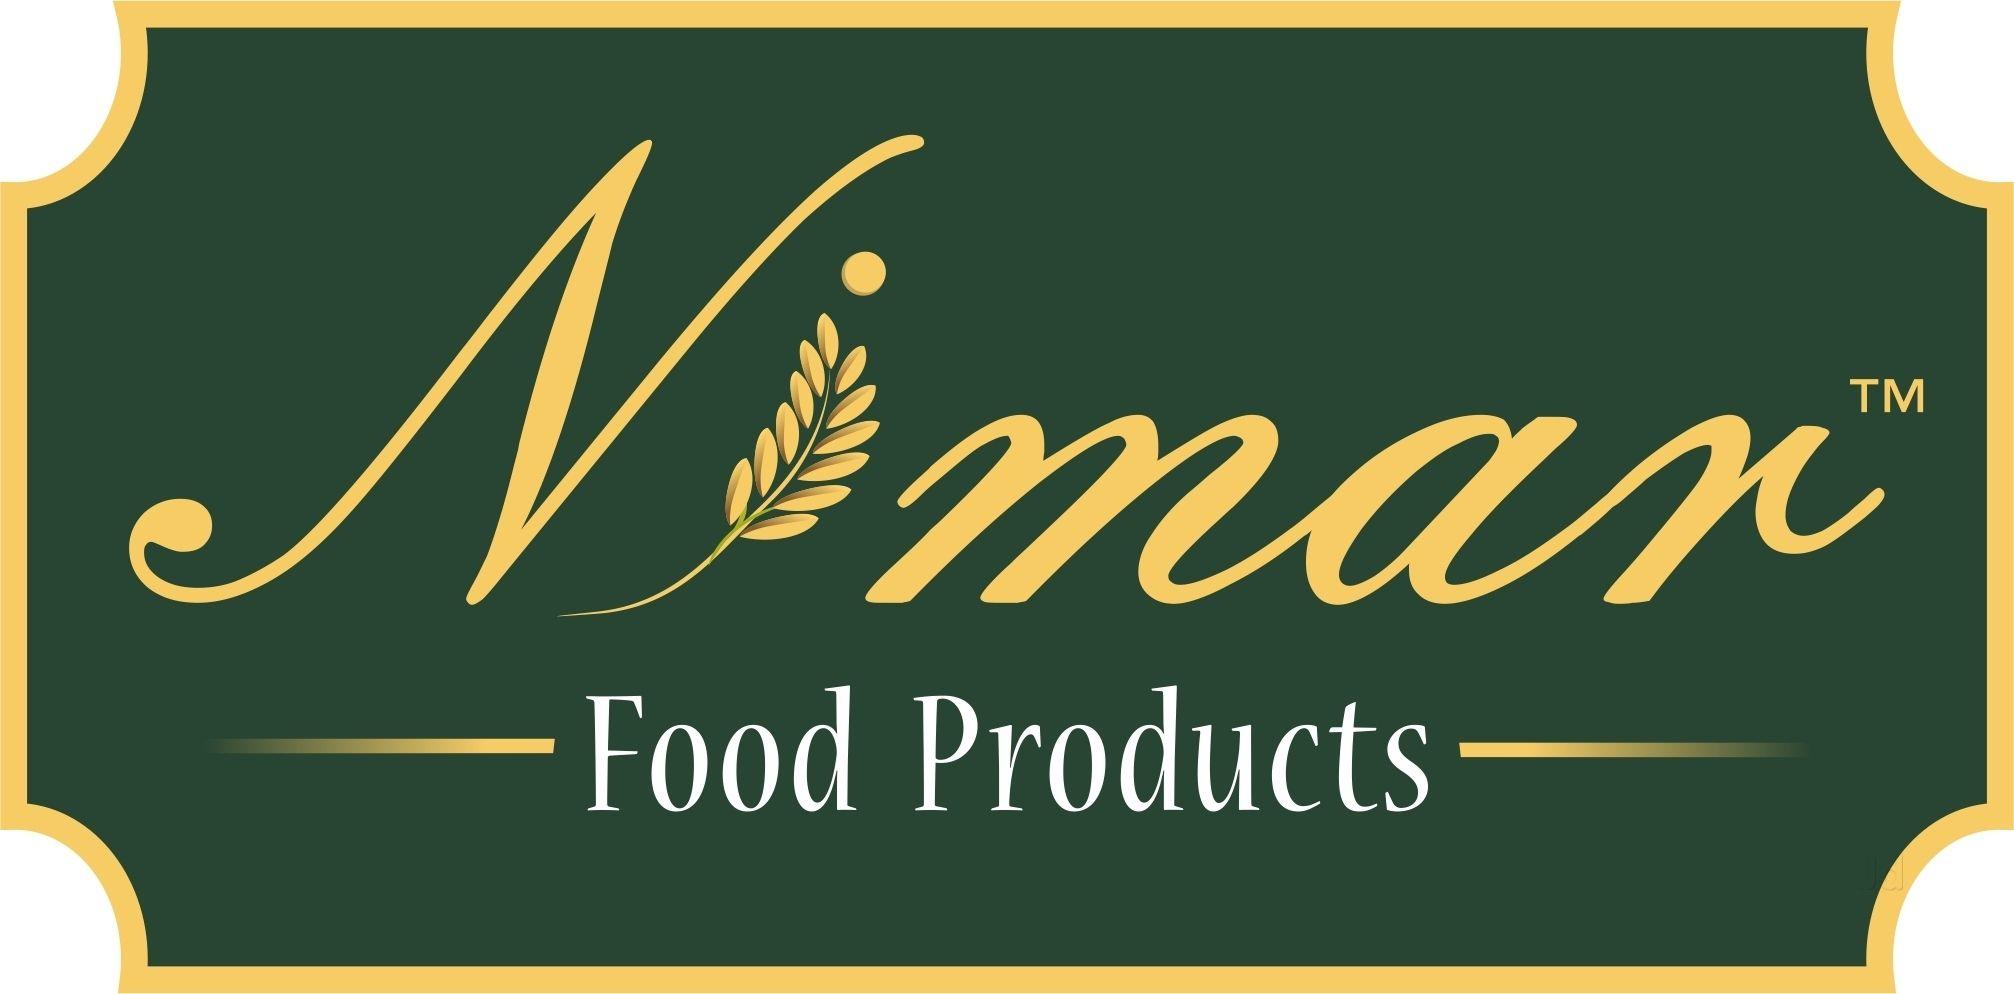 Food Product Logo - Nimar Food Products Photos, , Indore- Pictures & Images Gallery ...